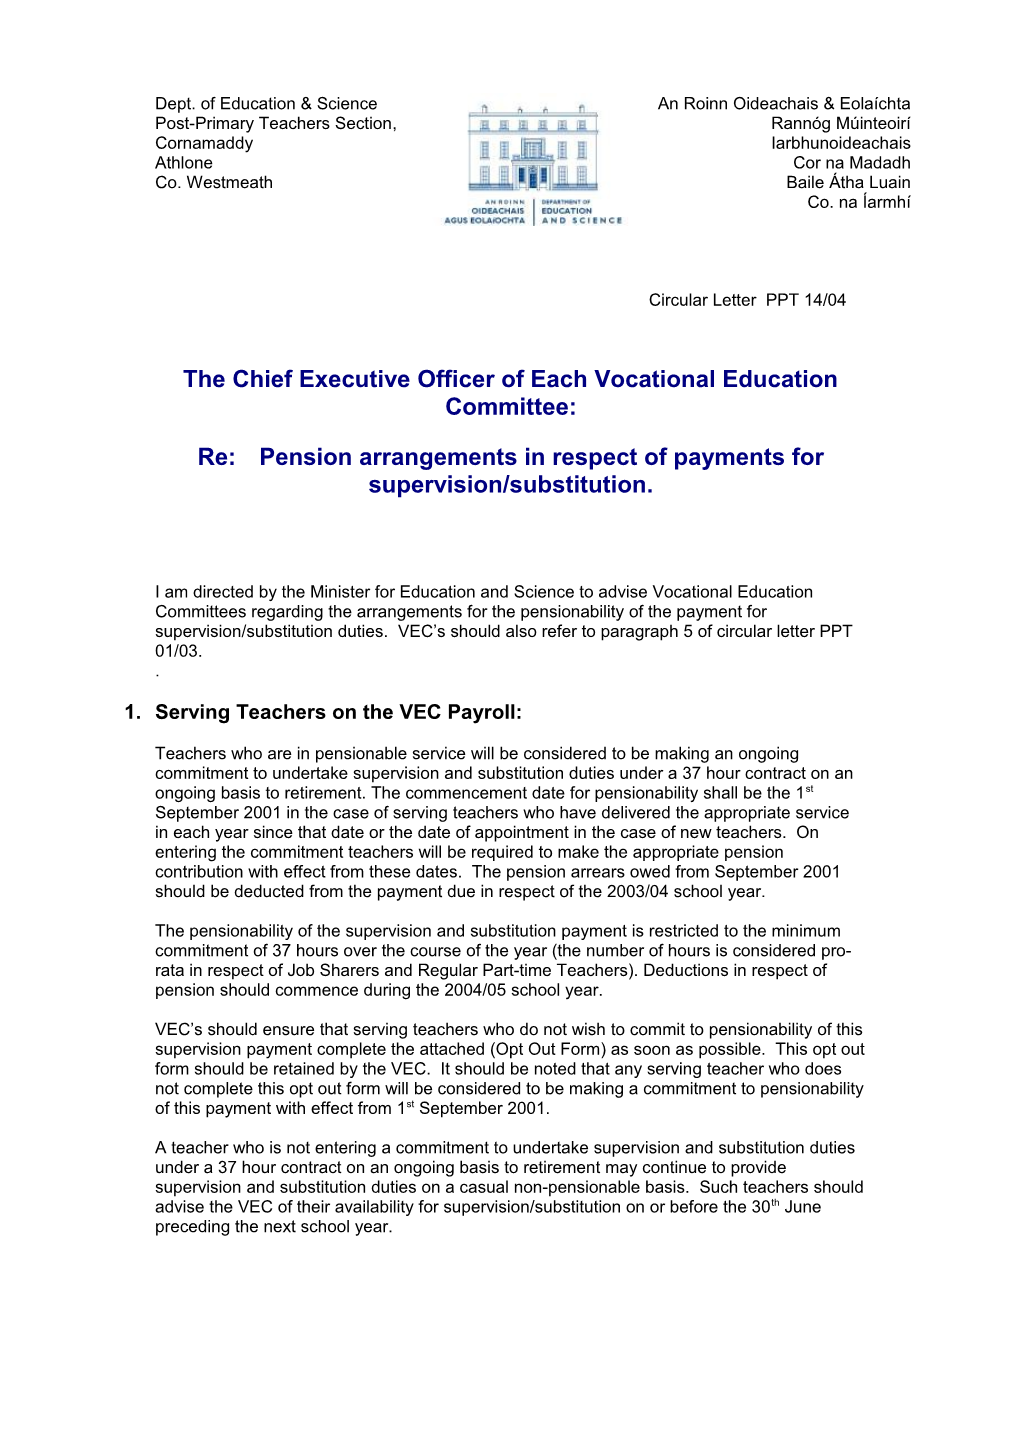 Vocational Education Committee - Circular PPT 14/04 - Pension Arrangements in Respect Of